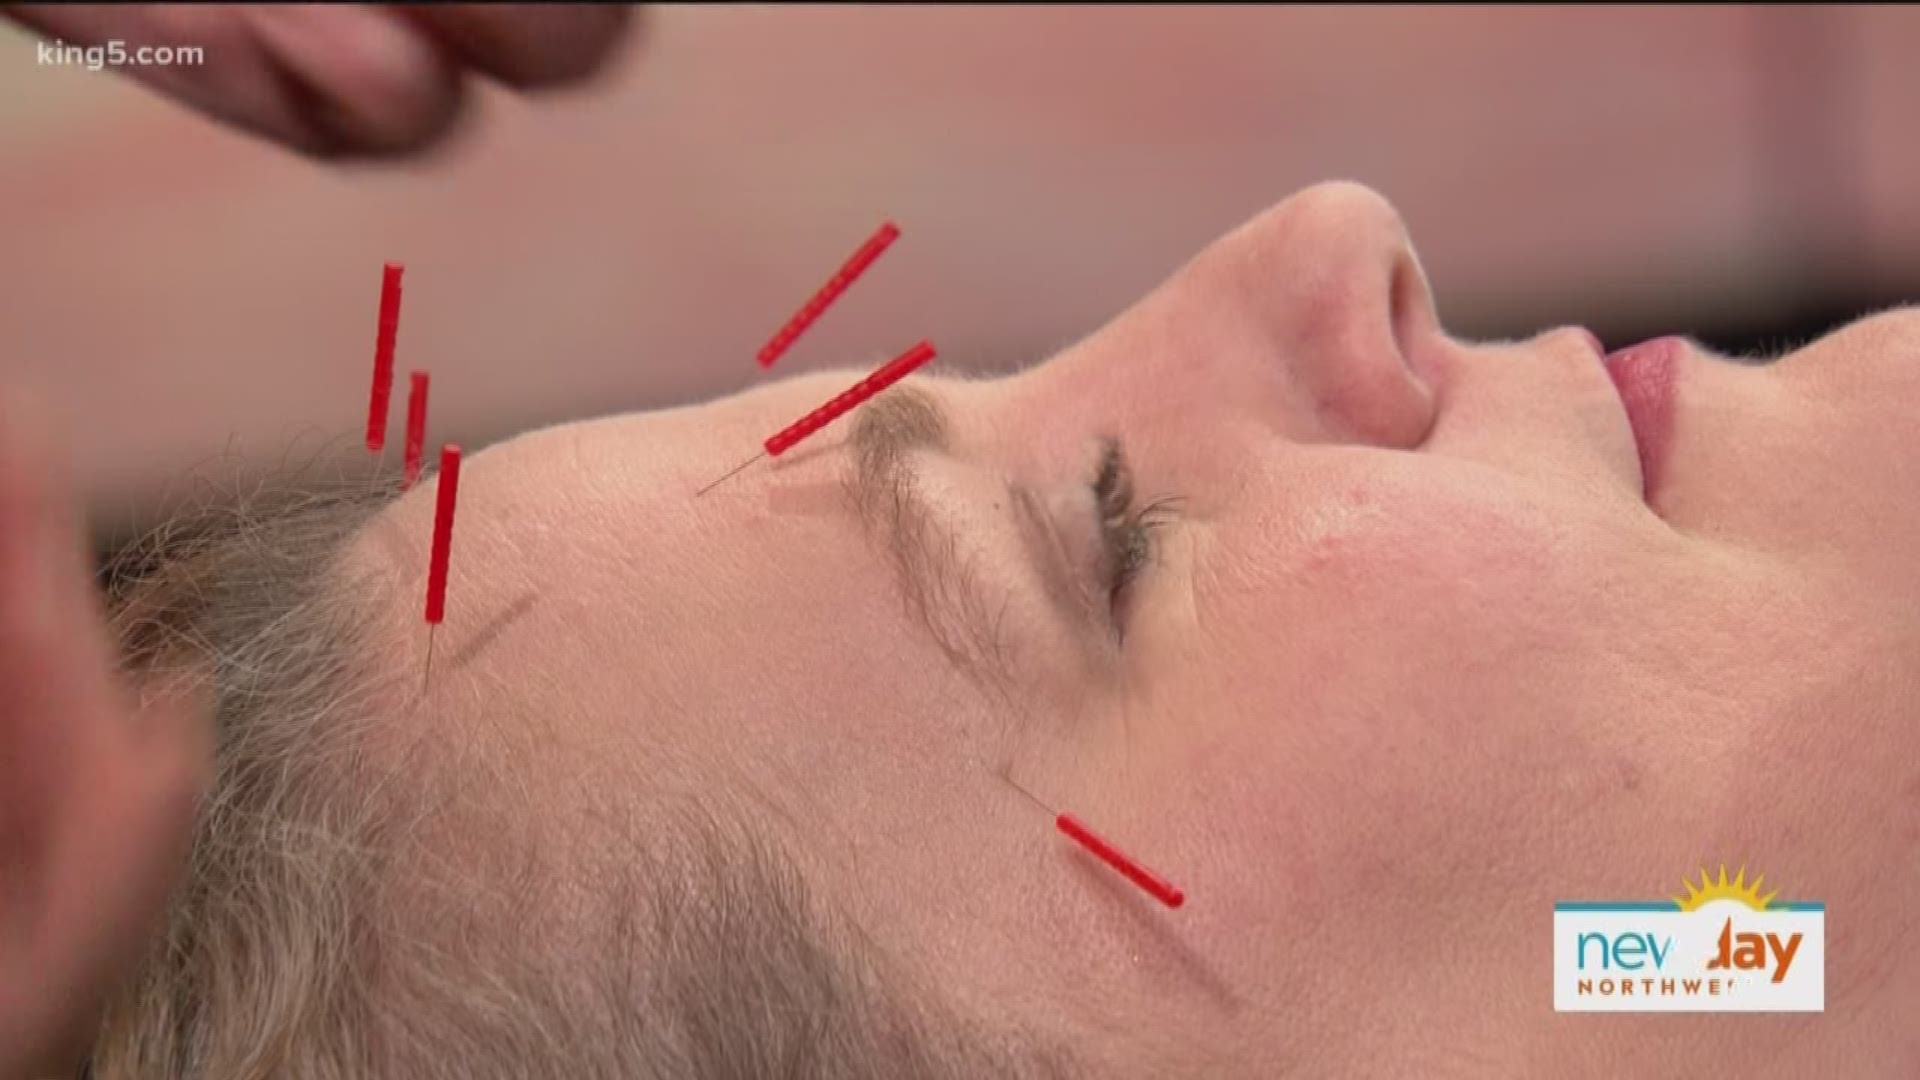 Modern Acupuncture offers cosmetic services that can help reduce the signs of aging in an exciting new way.